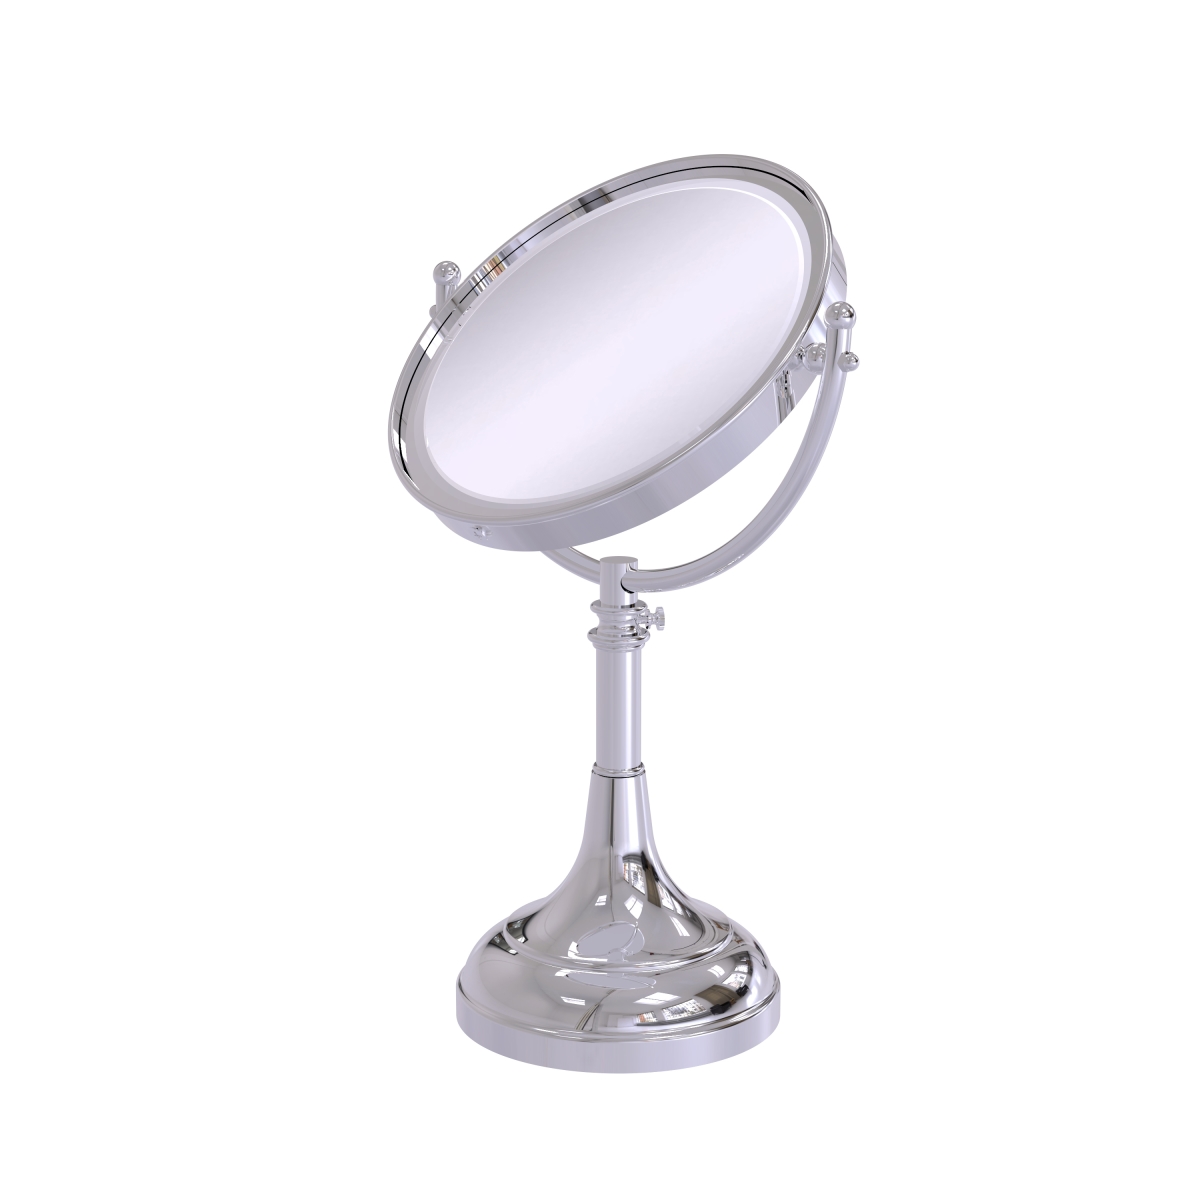 Picture of Allied Brass DM-1-3X-PC 8 in. Height Adjustable Vanity Top Make-Up Mirror 3X Magnification, Polished Chrome